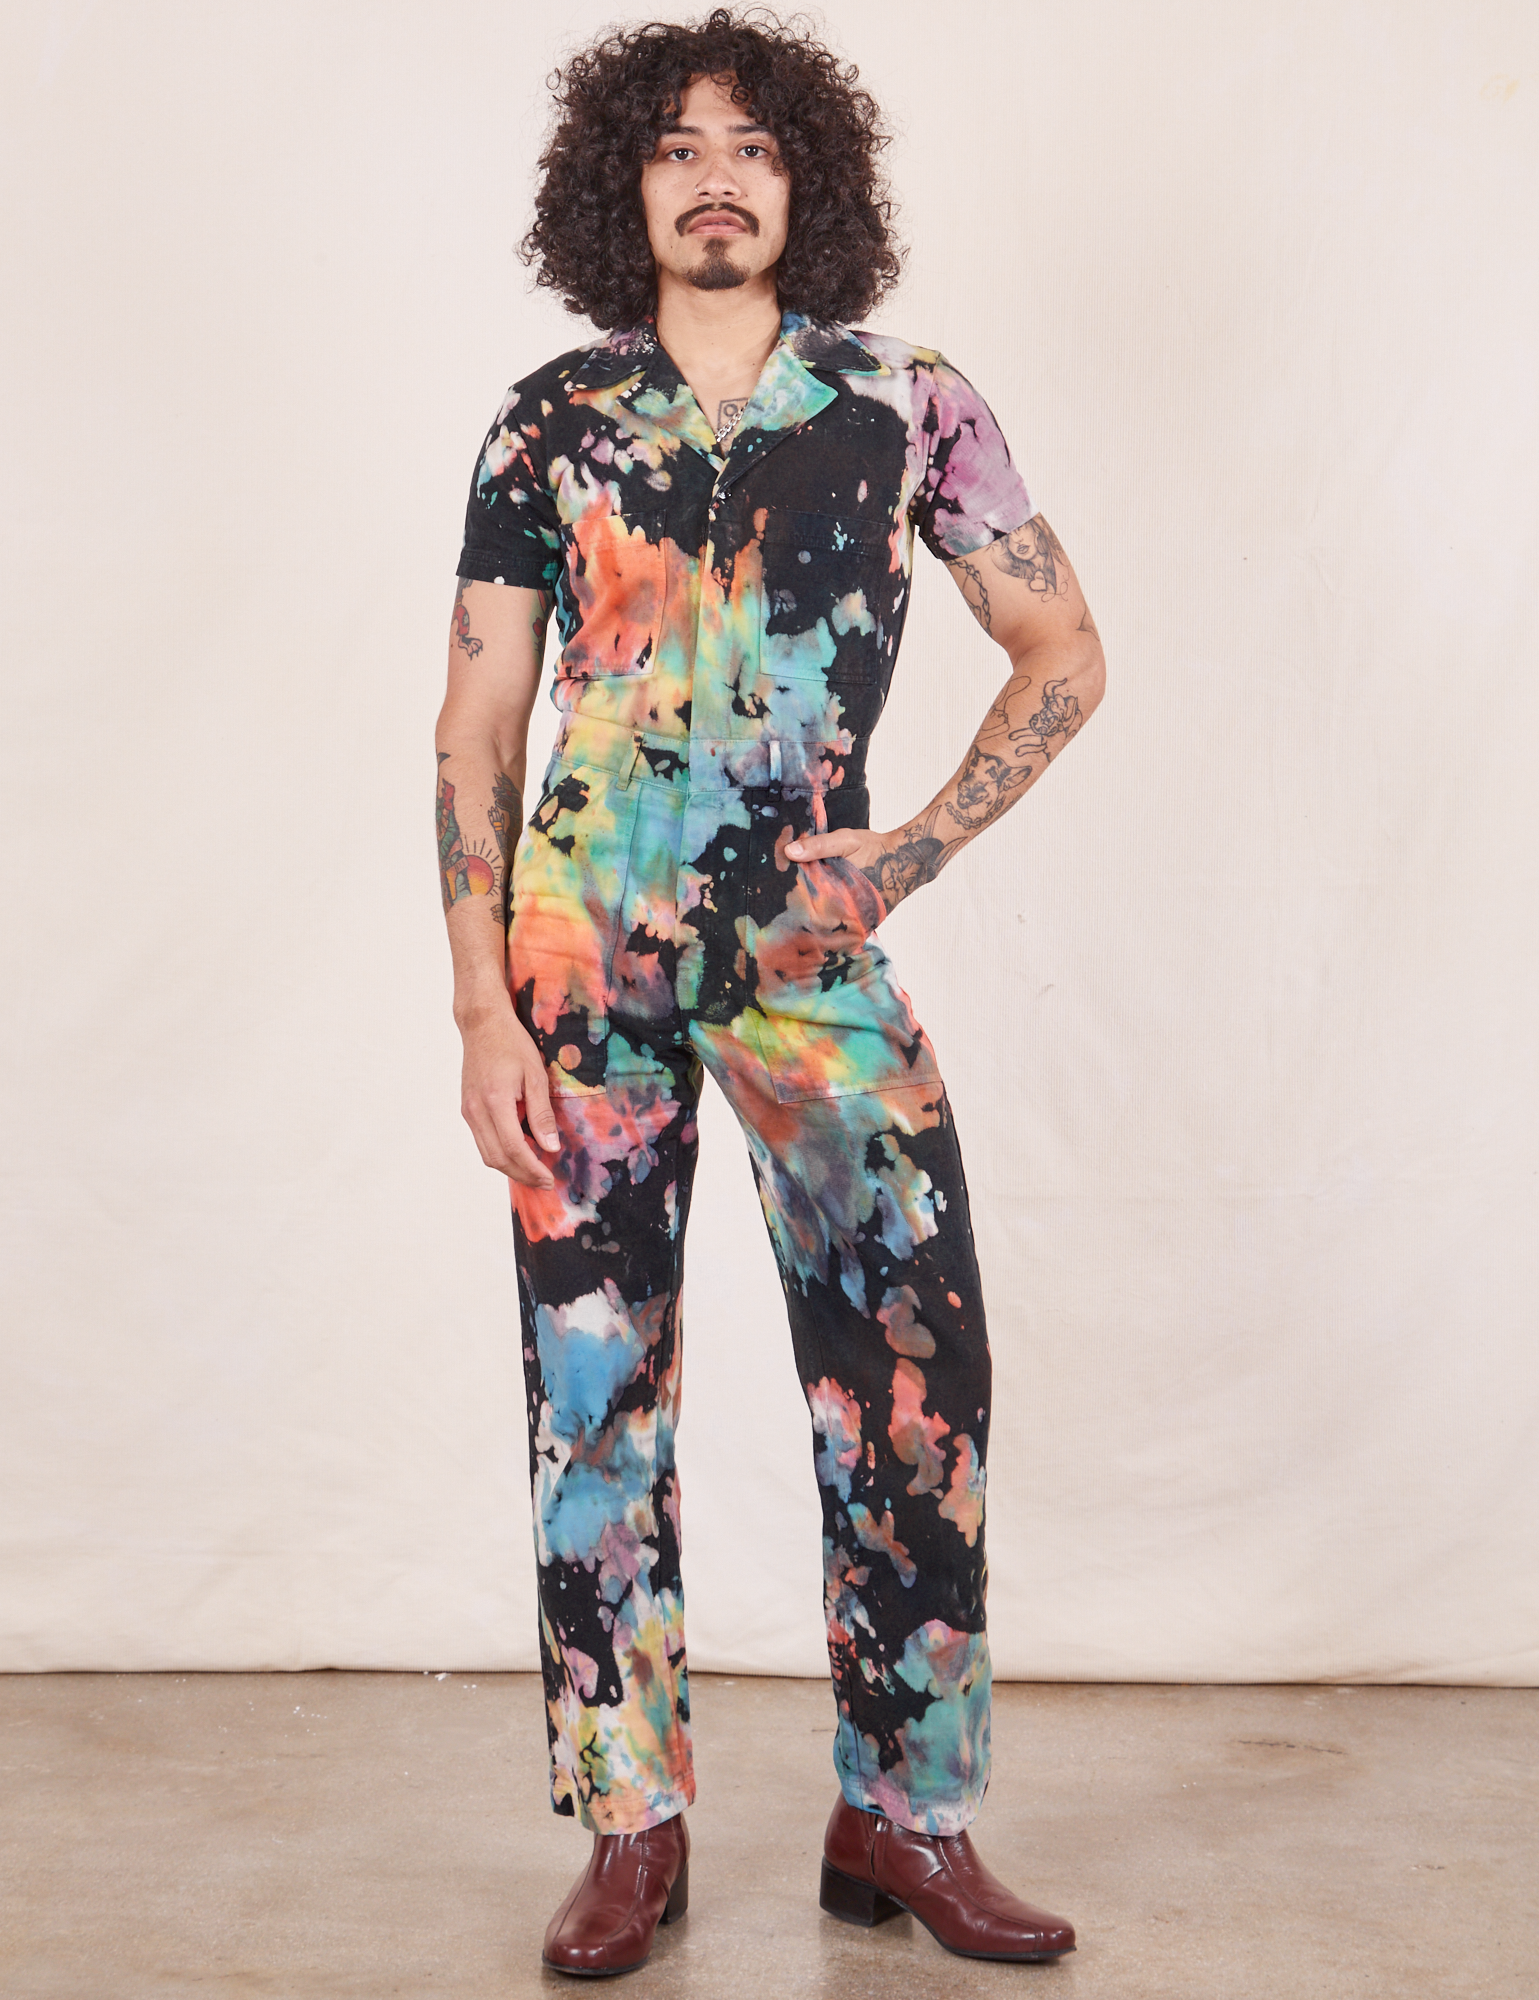 Jesse is 5&#39;8&quot; and wearing size S Short Sleeve Jumpsuit in Rainbow Magic Waters